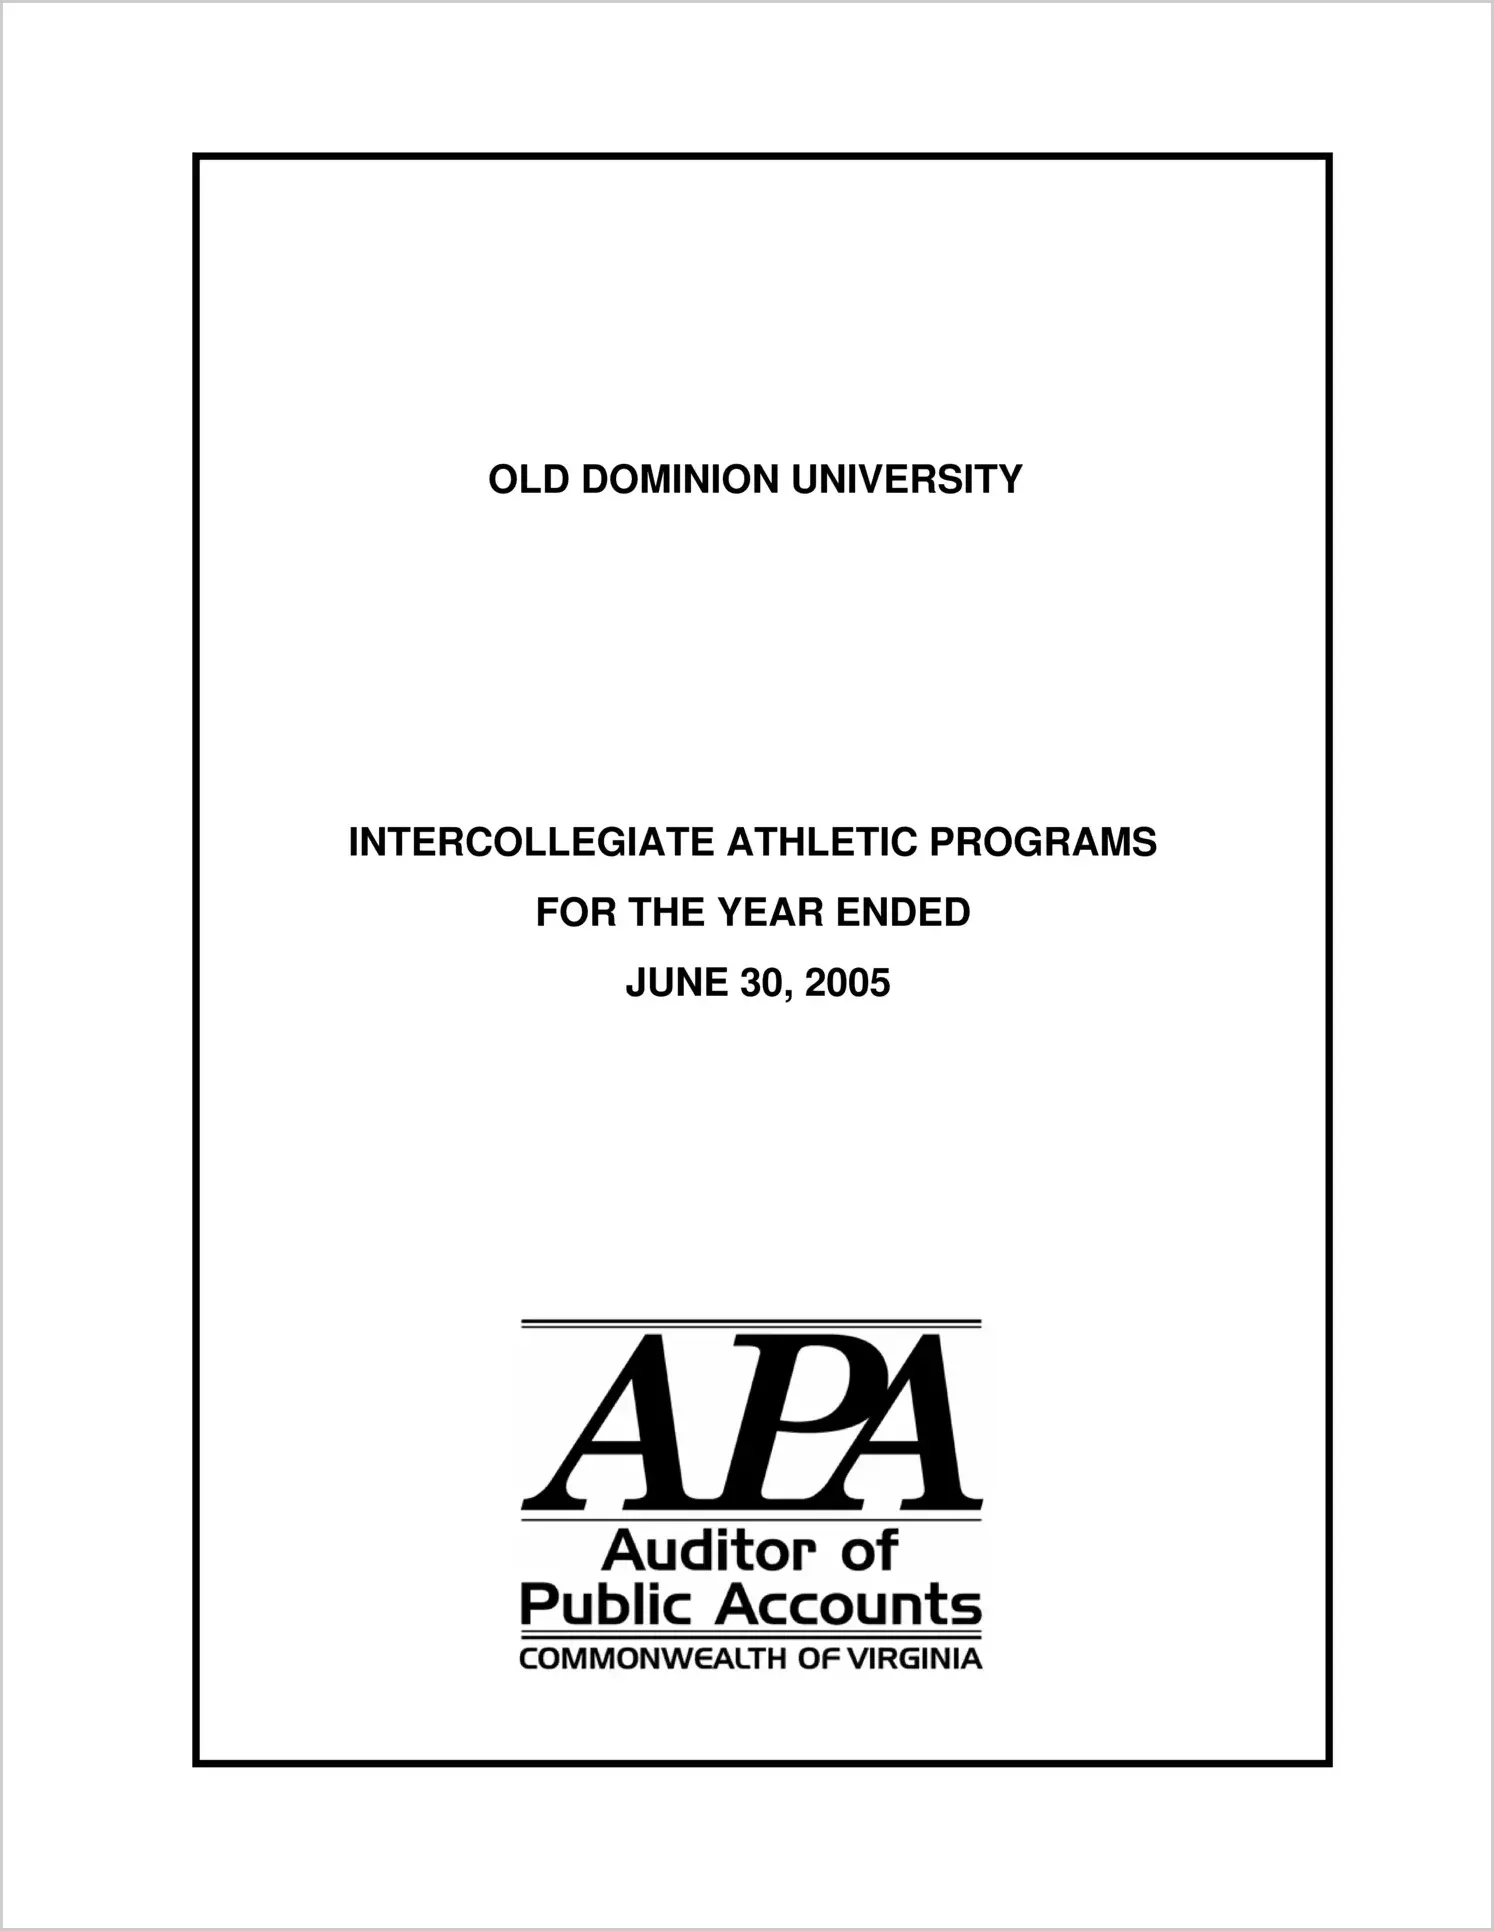 Old Dominion University Intercollegiate Athletic Programs for the year ended June 30, 2005